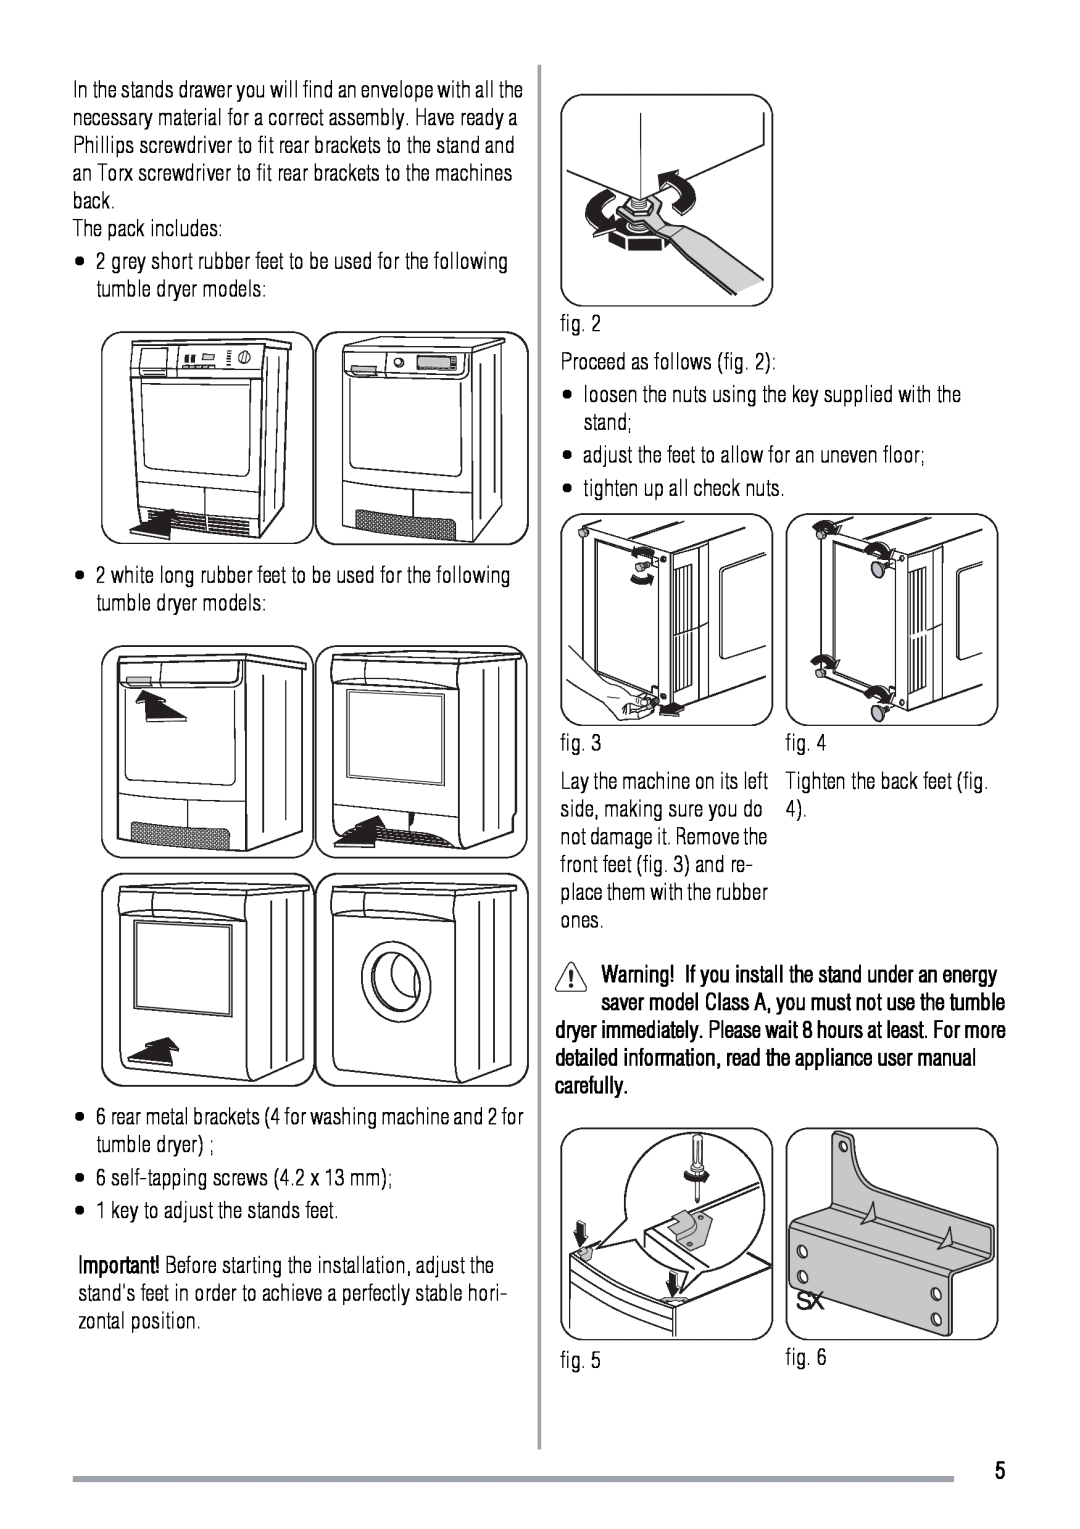 Zanussi Washer/Dryer detailed information, read the appliance user manual carefully 